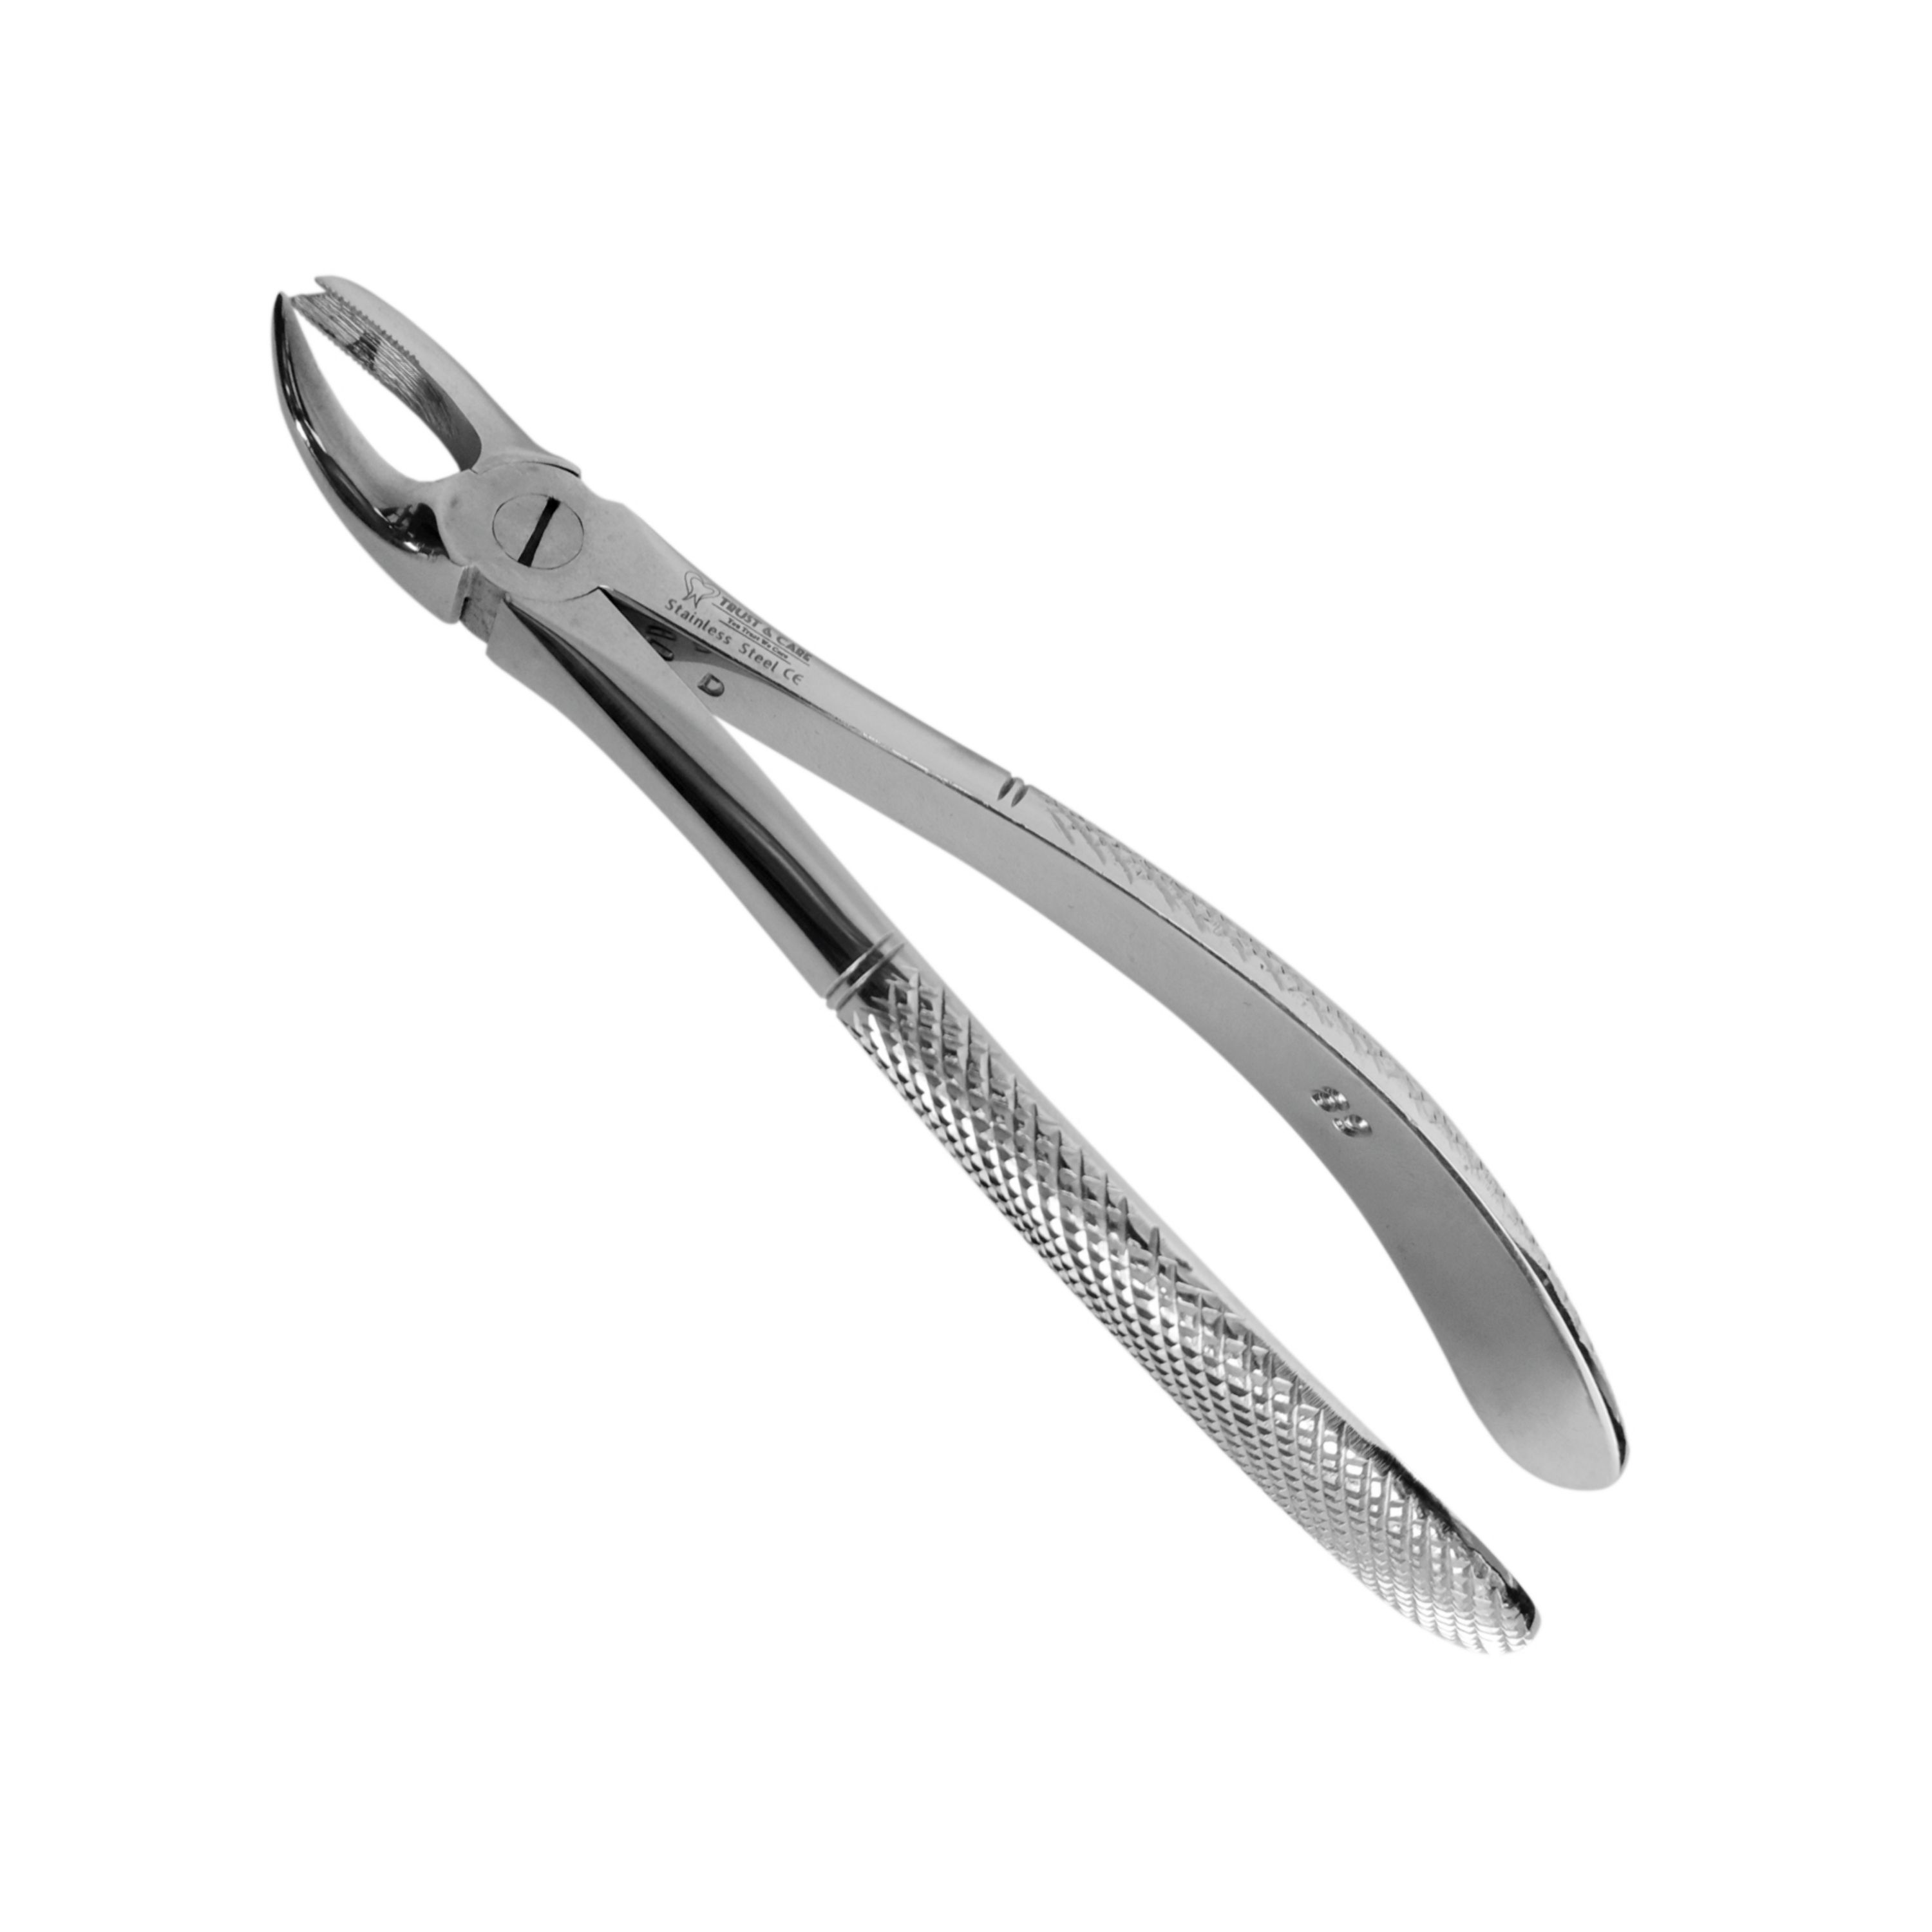 Trust & Care Tooth Extraction Forcep Upper Molars Right Fig No. 89 Standard